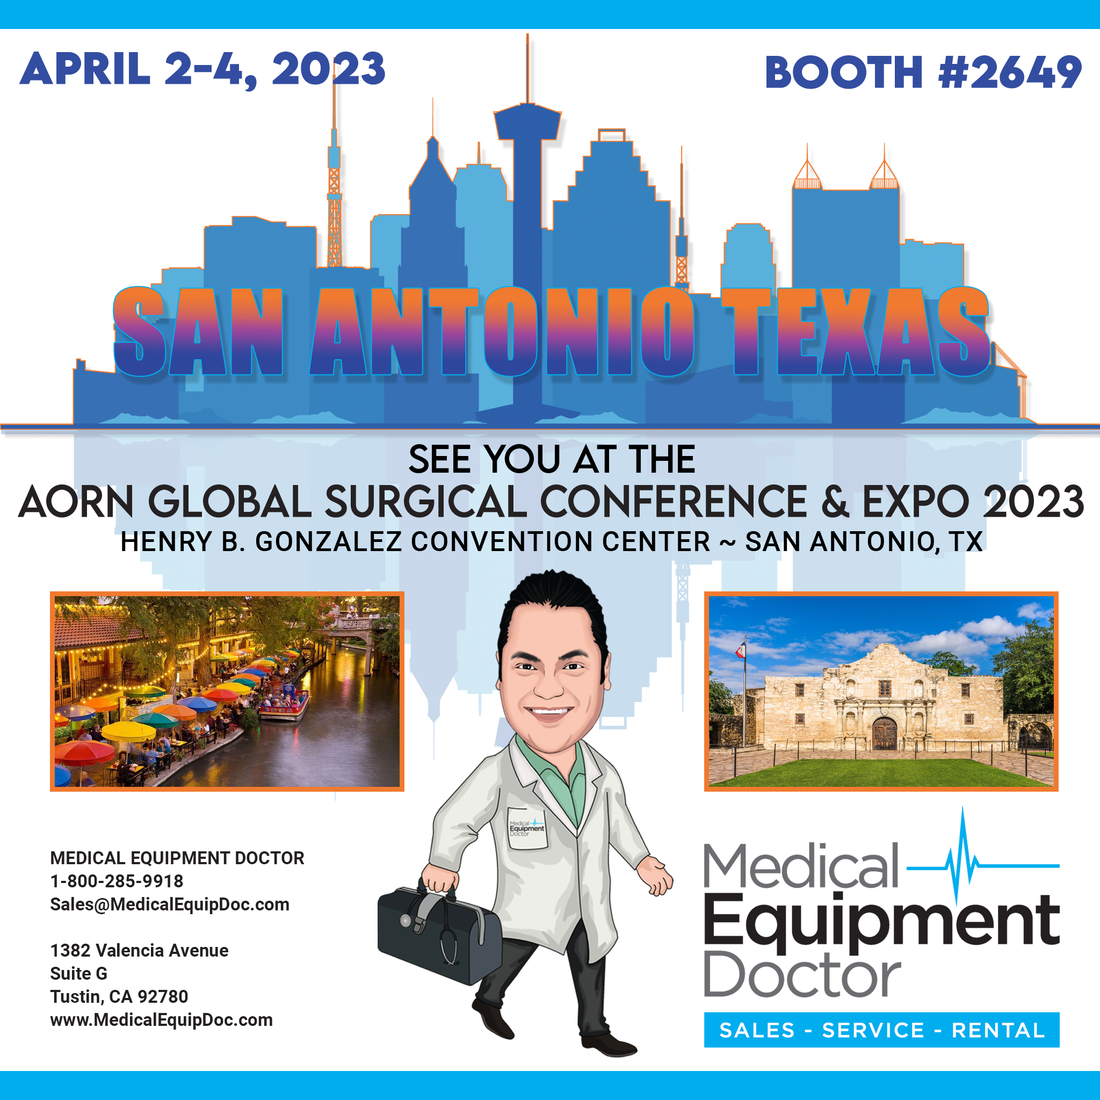 AORN Global Surgical Conference & Expo April 2-4, 2023